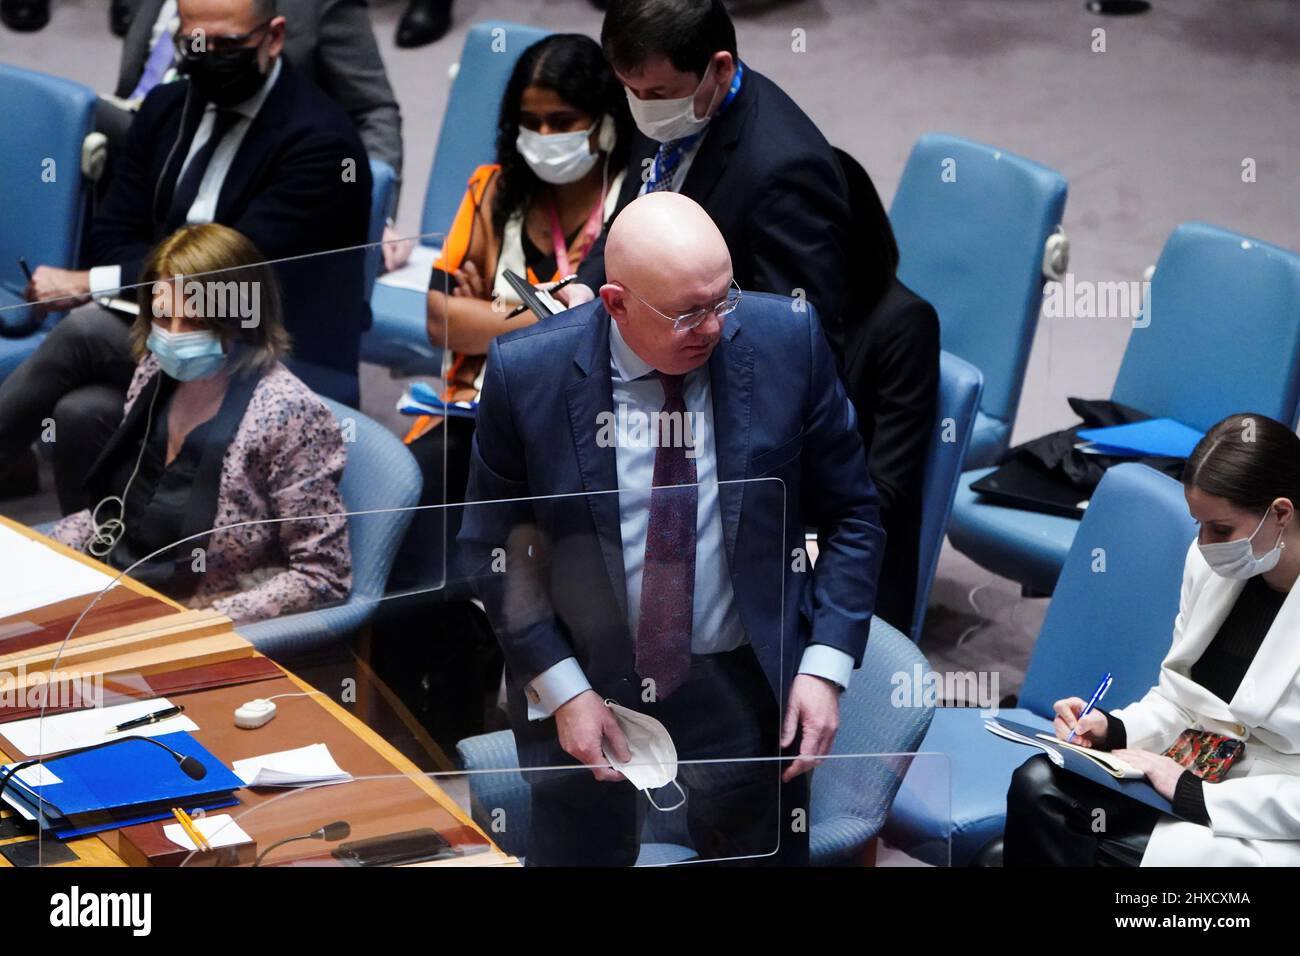 Russia's Ambassador to the U.N. Vasily Nebenzya gets up to leave for a break during the United Nations Security Council meeting on Threats to International Peace and Security, following Russia's invasion of Ukraine, in New York City, U.S. March 11, 2022. REUTERS/Carlo Allegri Stock Photo